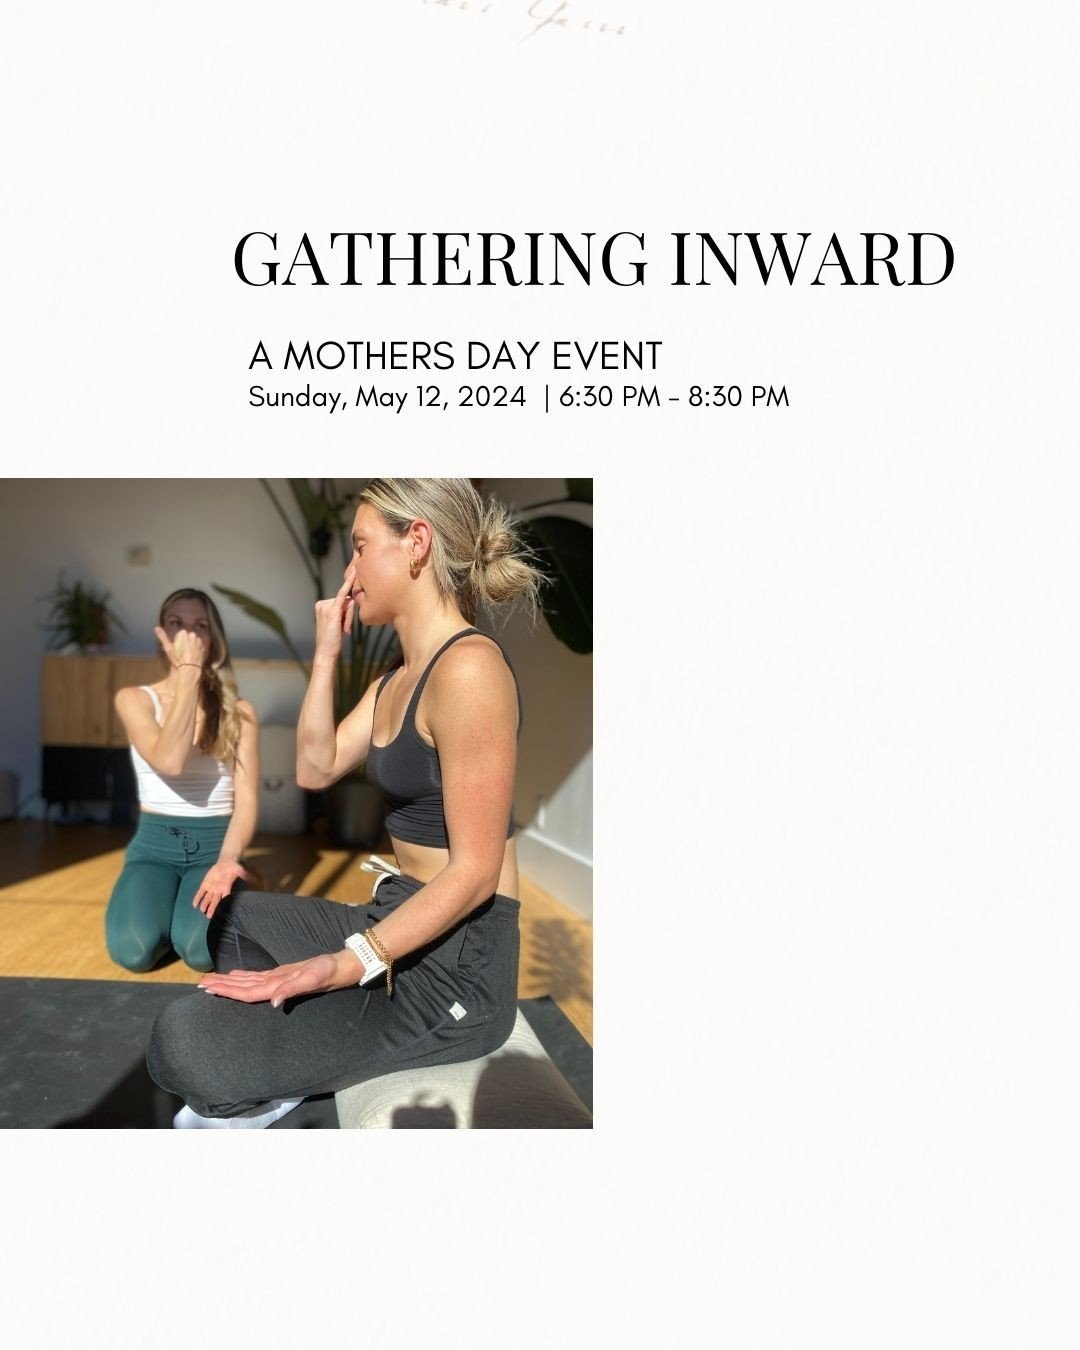 GATHERING INWARD⁠
___ a mother's day event⁠
⁠
Sunday, May 12, 2024⁠
6:30 PM  8:30 PM⁠
@sjdeas⁠
⁠
⁠
Simply take time for yourself and explore practices that will create a deeper sense of self love and gratitude.  Gentle movement, invigorating breathwo